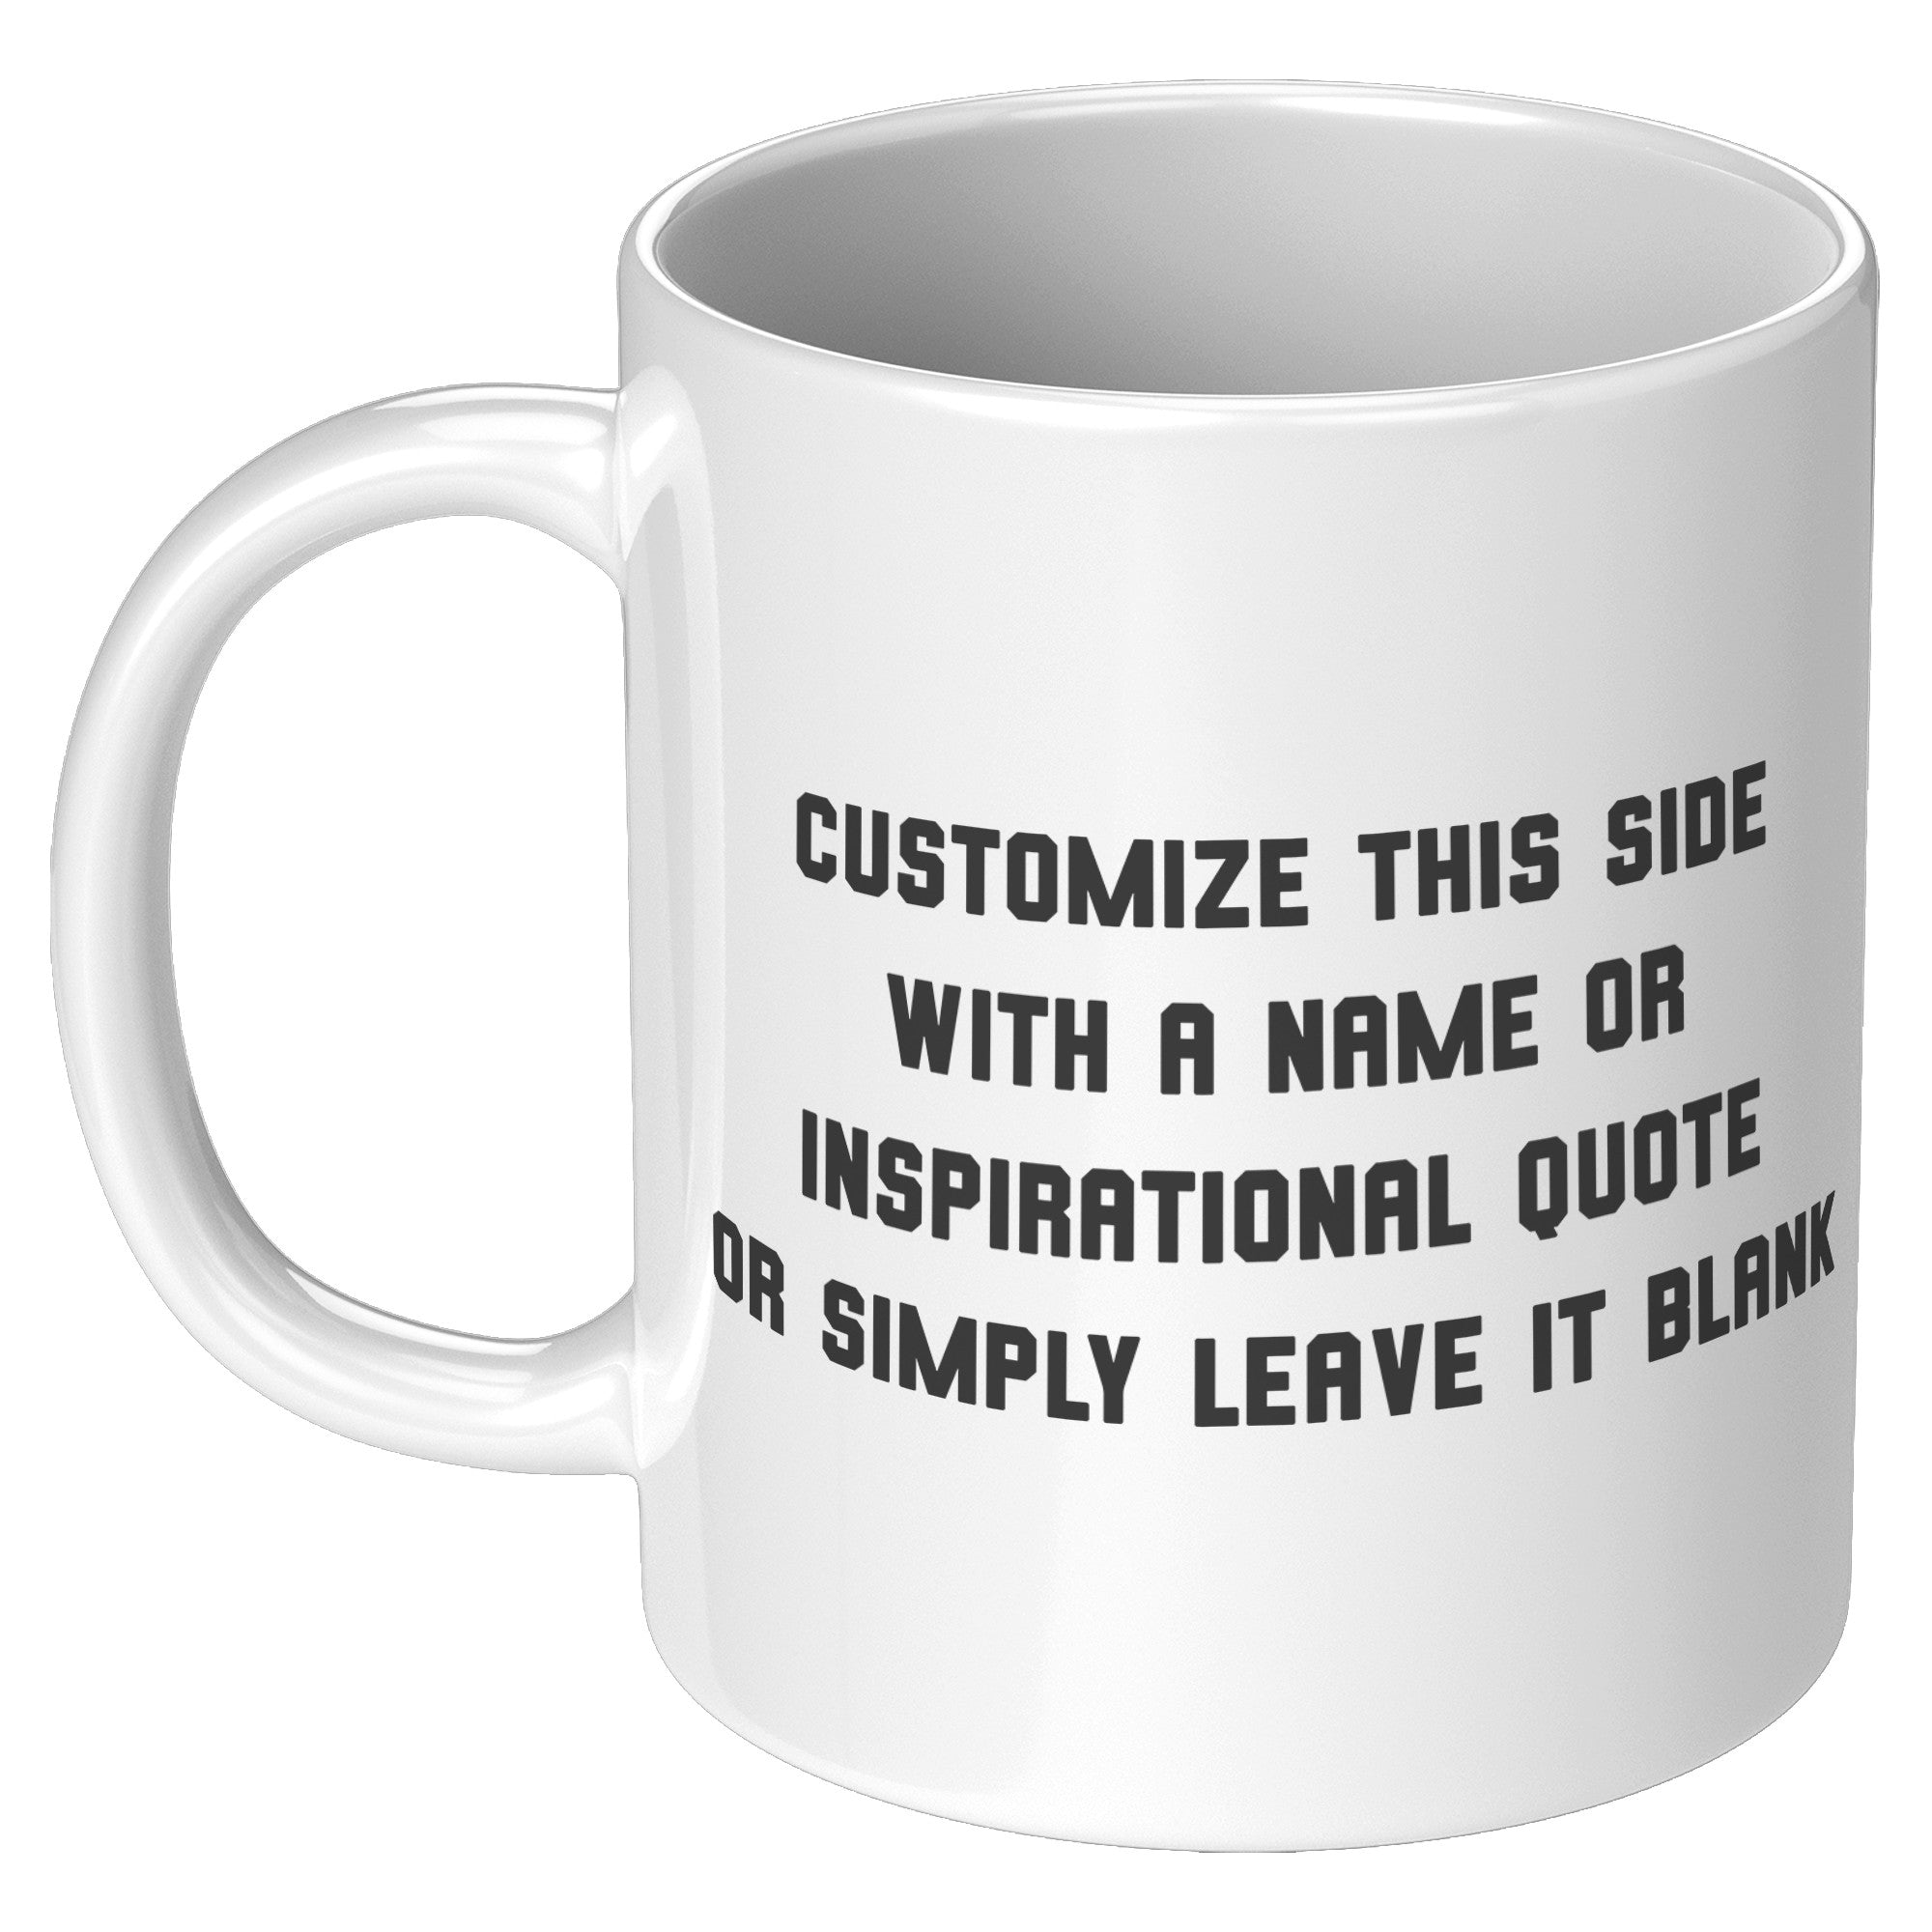 "Female Runner Coffee Mug - Inspirational Running Quotes Cup - Perfect Gift for Women Runners - Motivational Marathoner's Morning Brew" - A